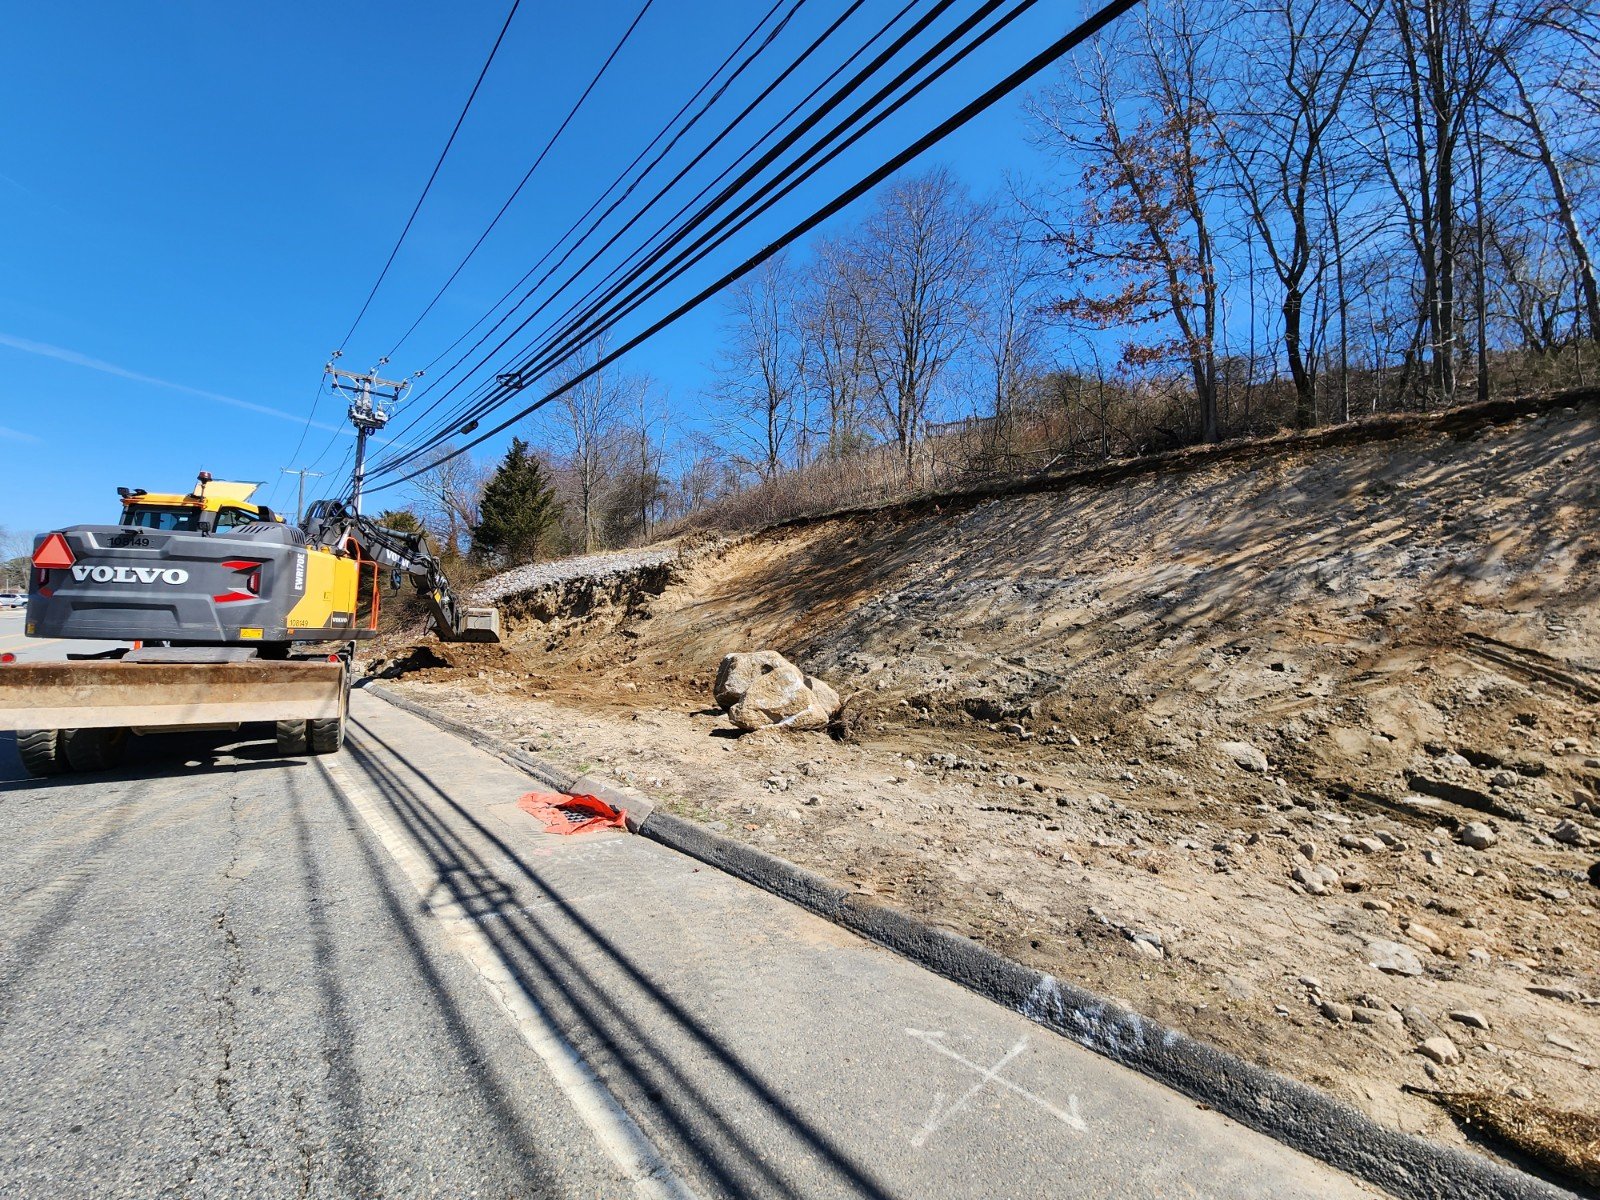 Earth excavation for roadway widening and utility pole relocation - Flanders Road (Route 161 NB)